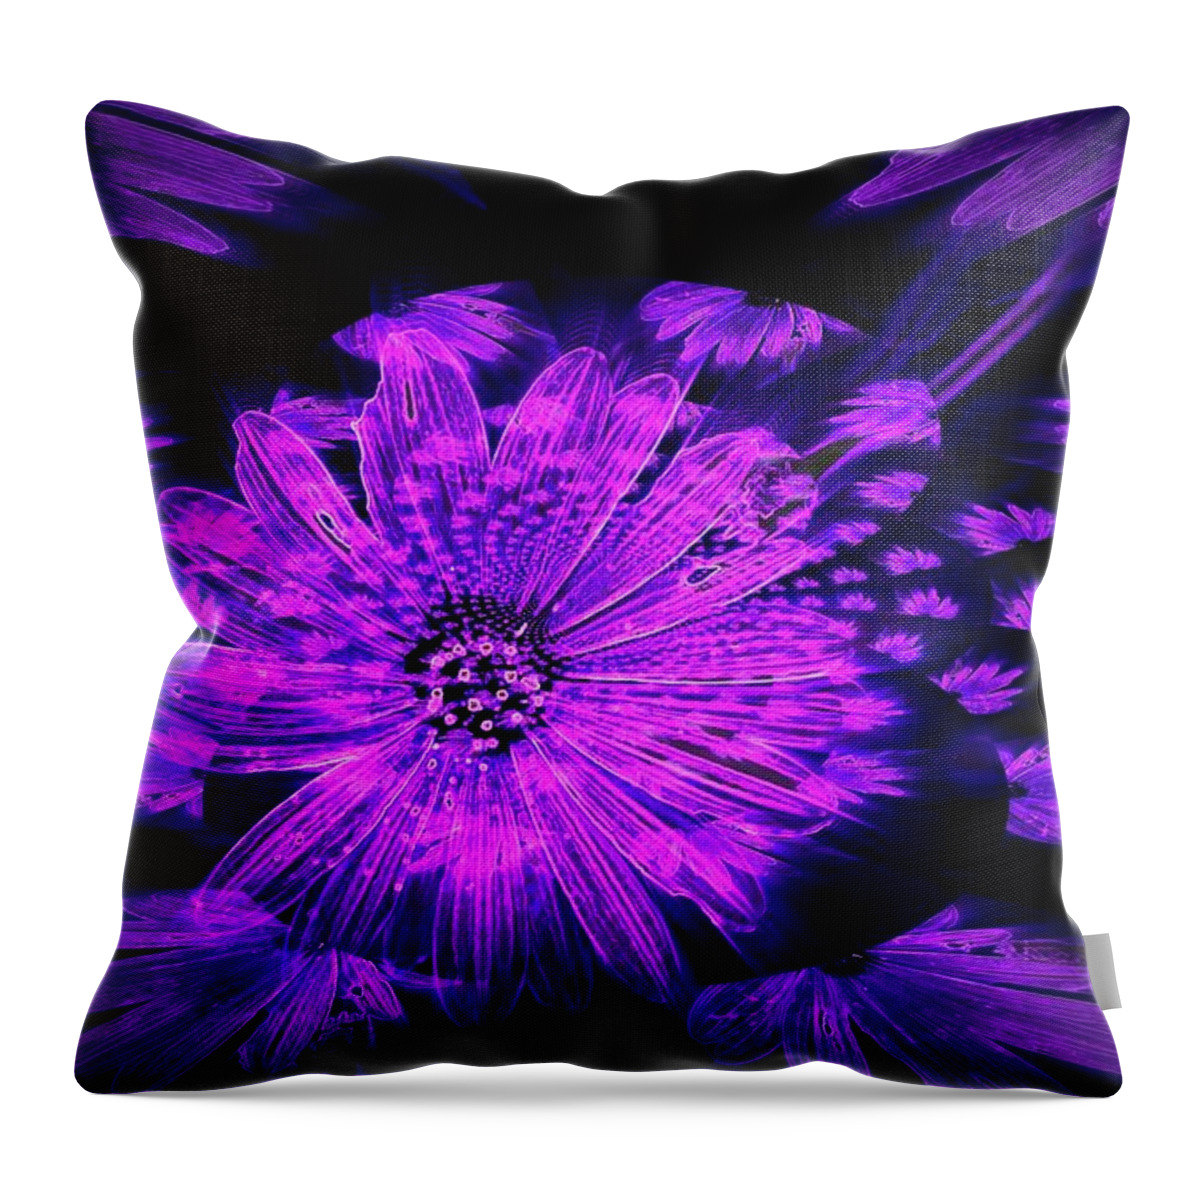 Abstract Throw Pillow featuring the digital art Purple Wisps of Flower by Amanda Eberly